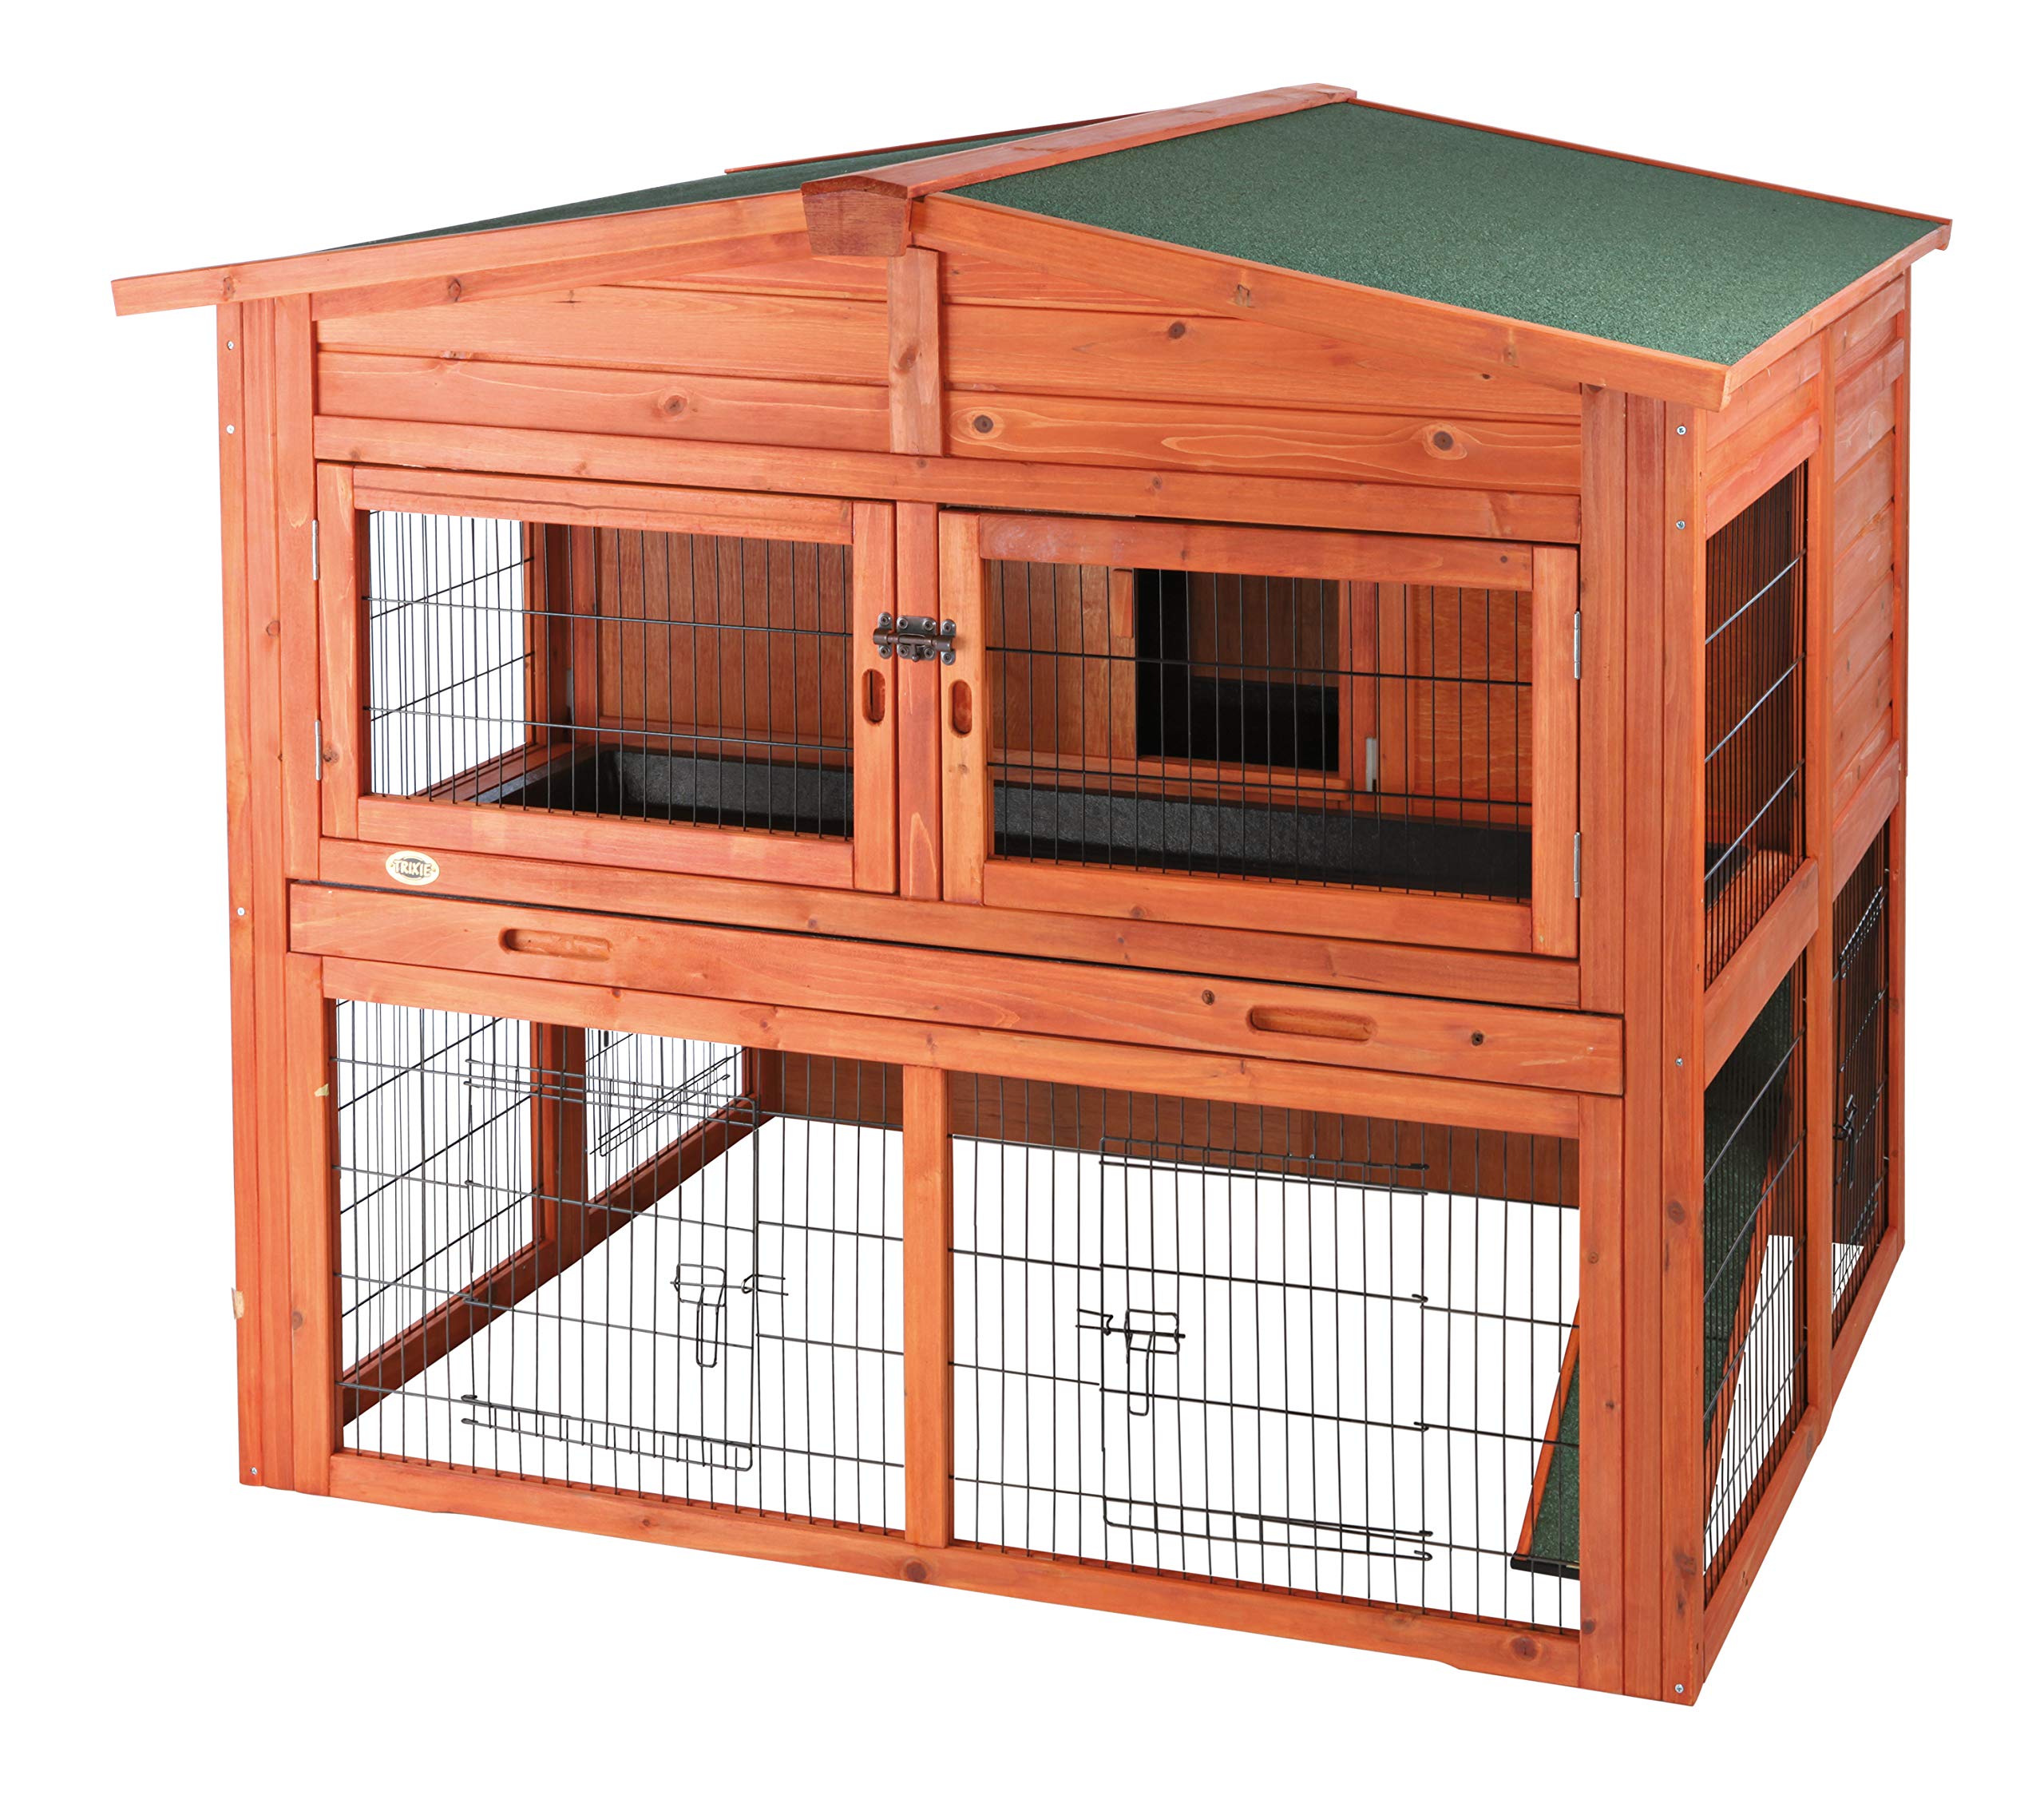 TRIXIE Pet Products Rabbit Hutch with Attic (XL) 53 x 44 x 45.25 inches